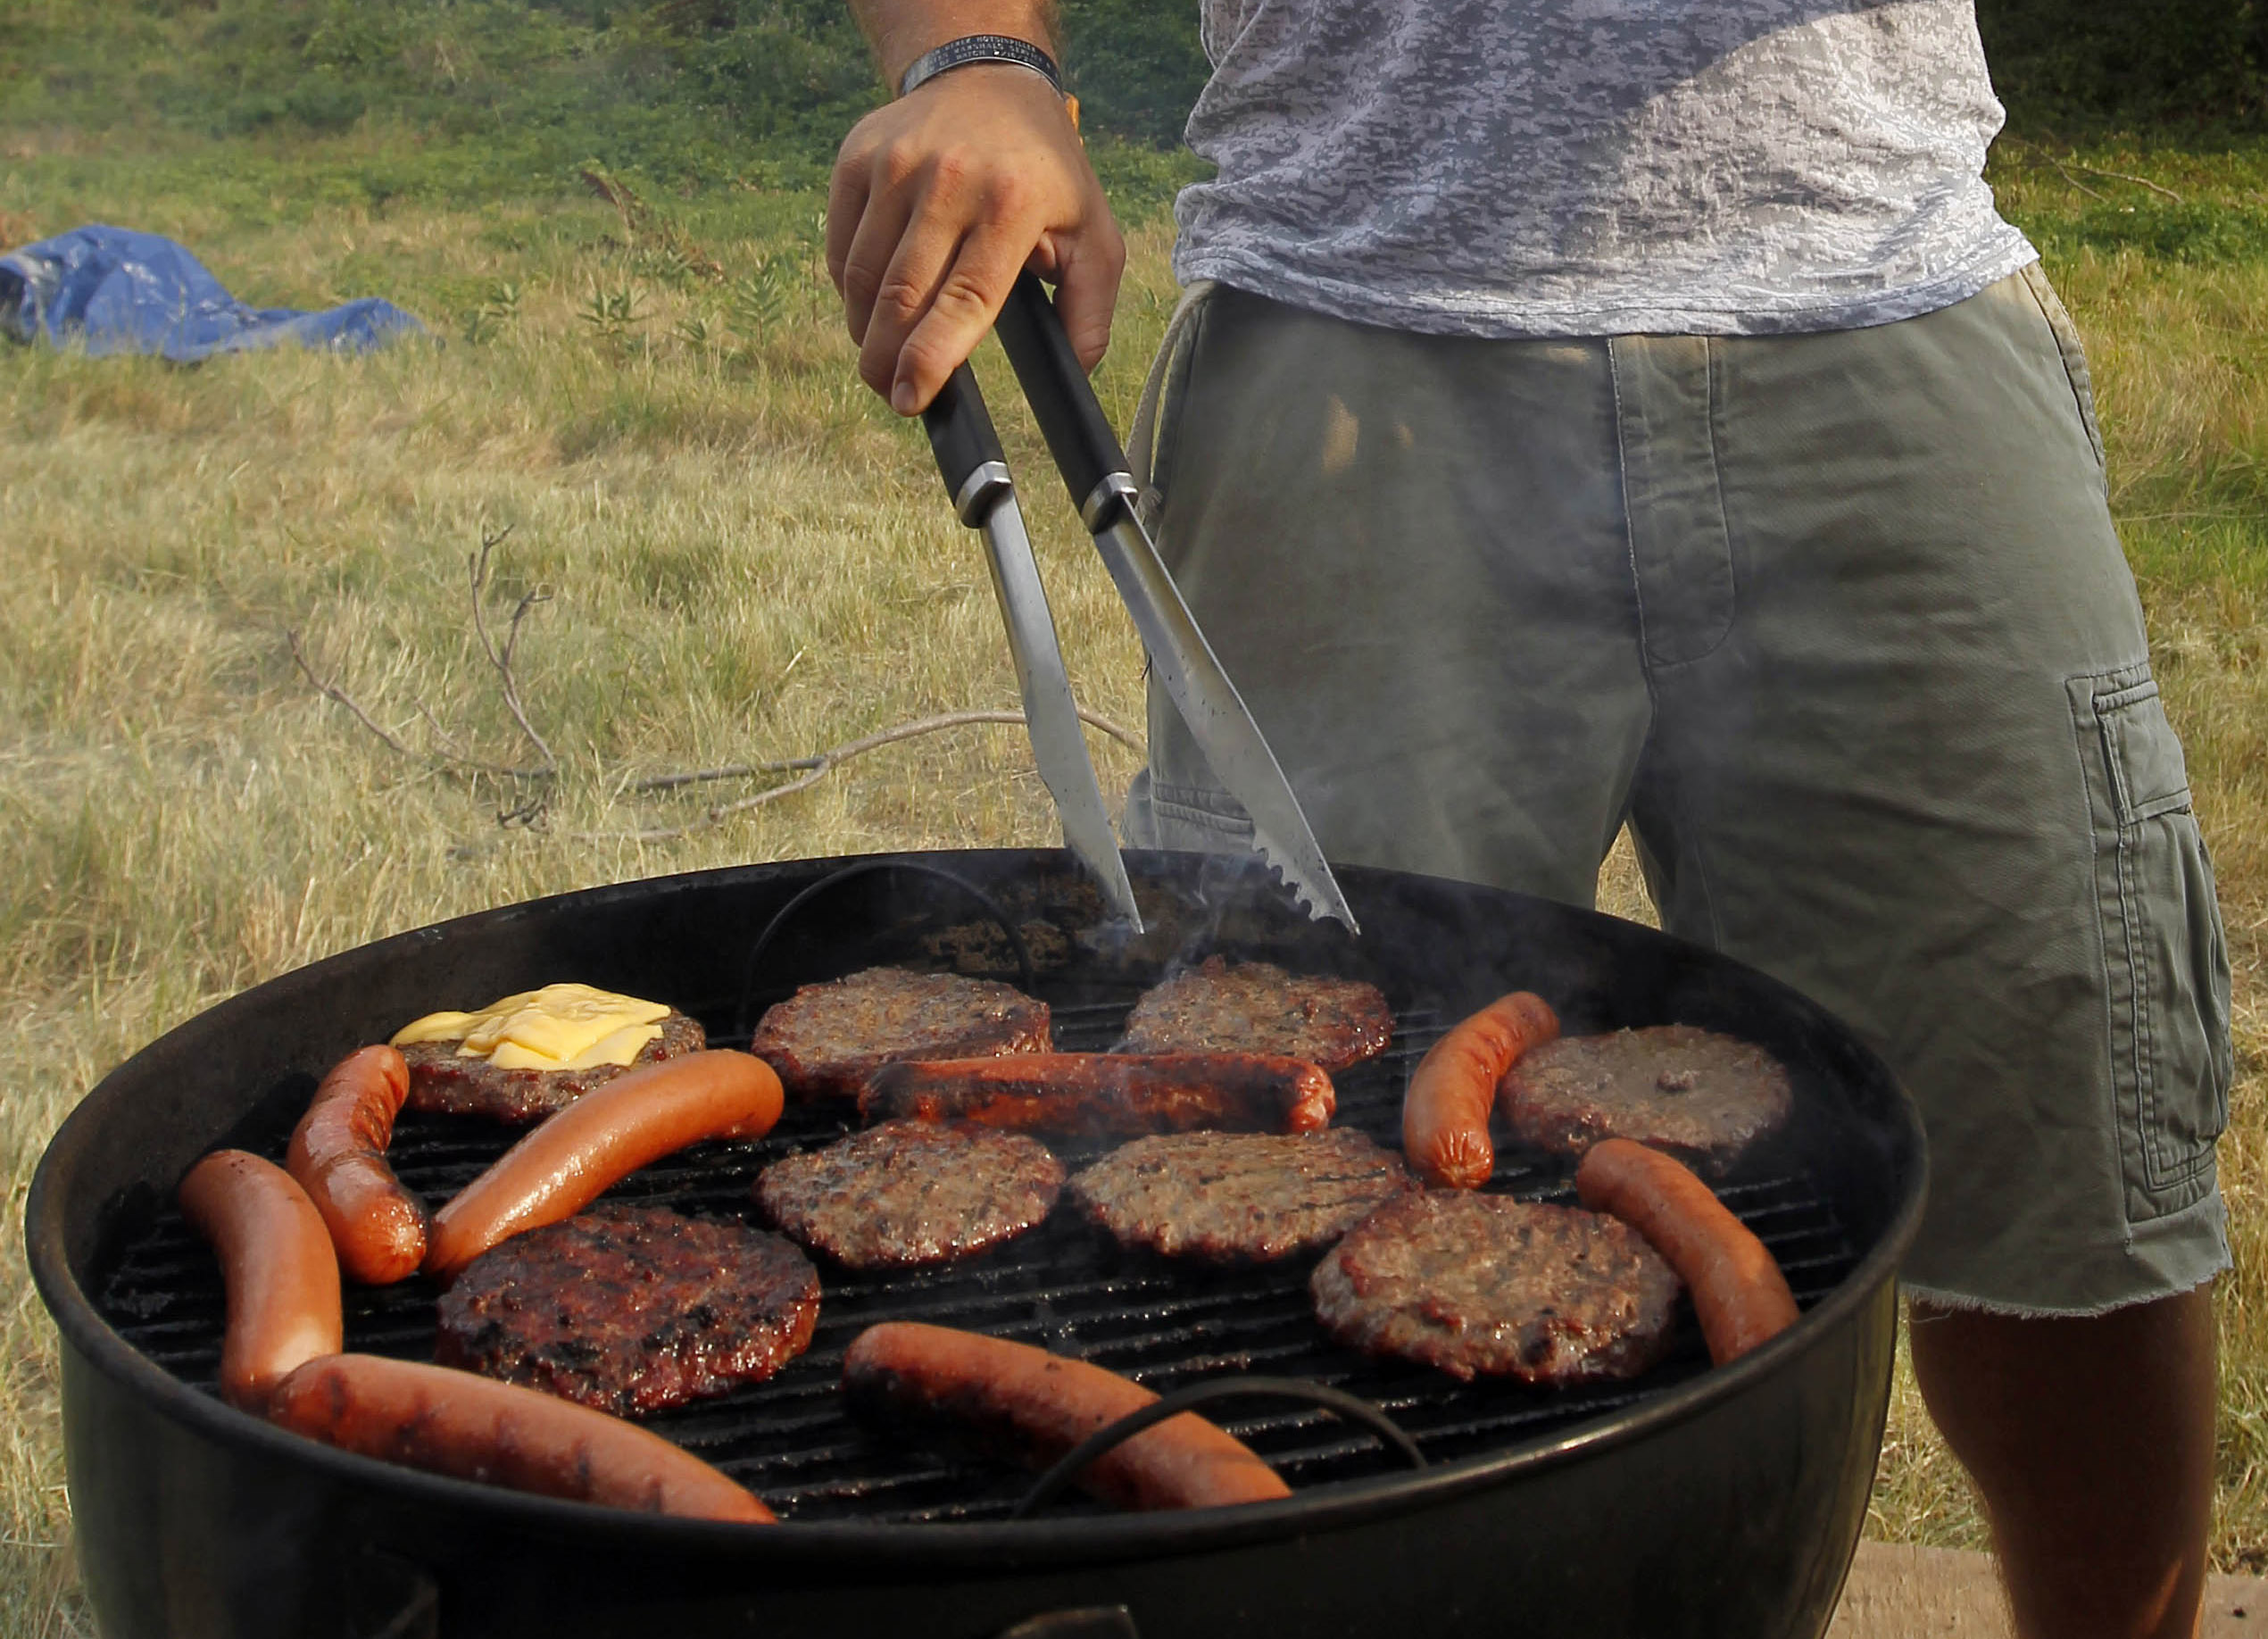 Person grilling hamburgers and hotdogs